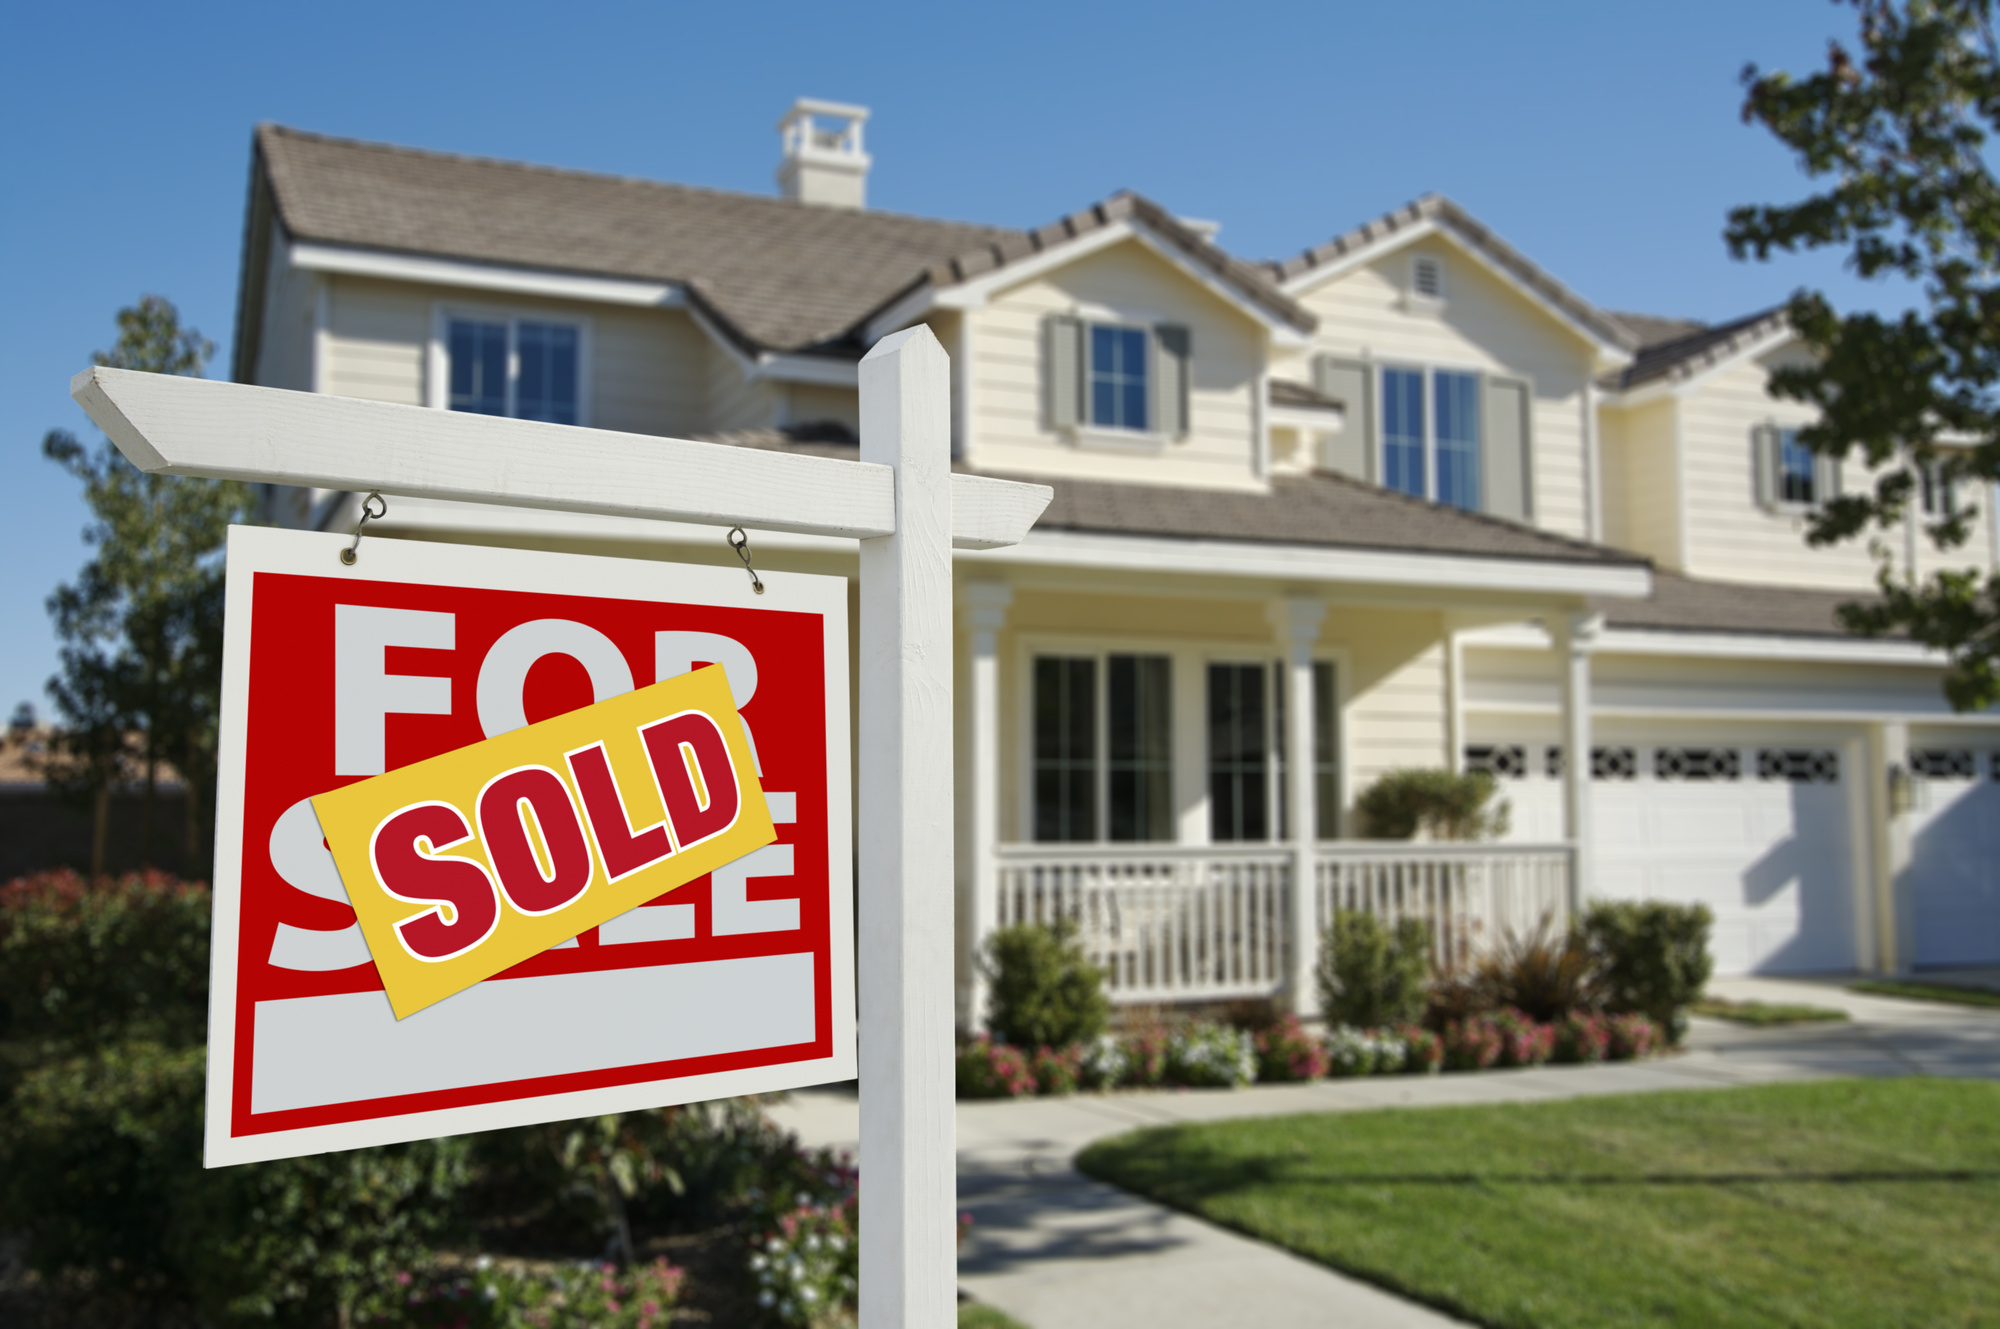 3 Common Mistakes to Avoid When Advertising Houses for Sale